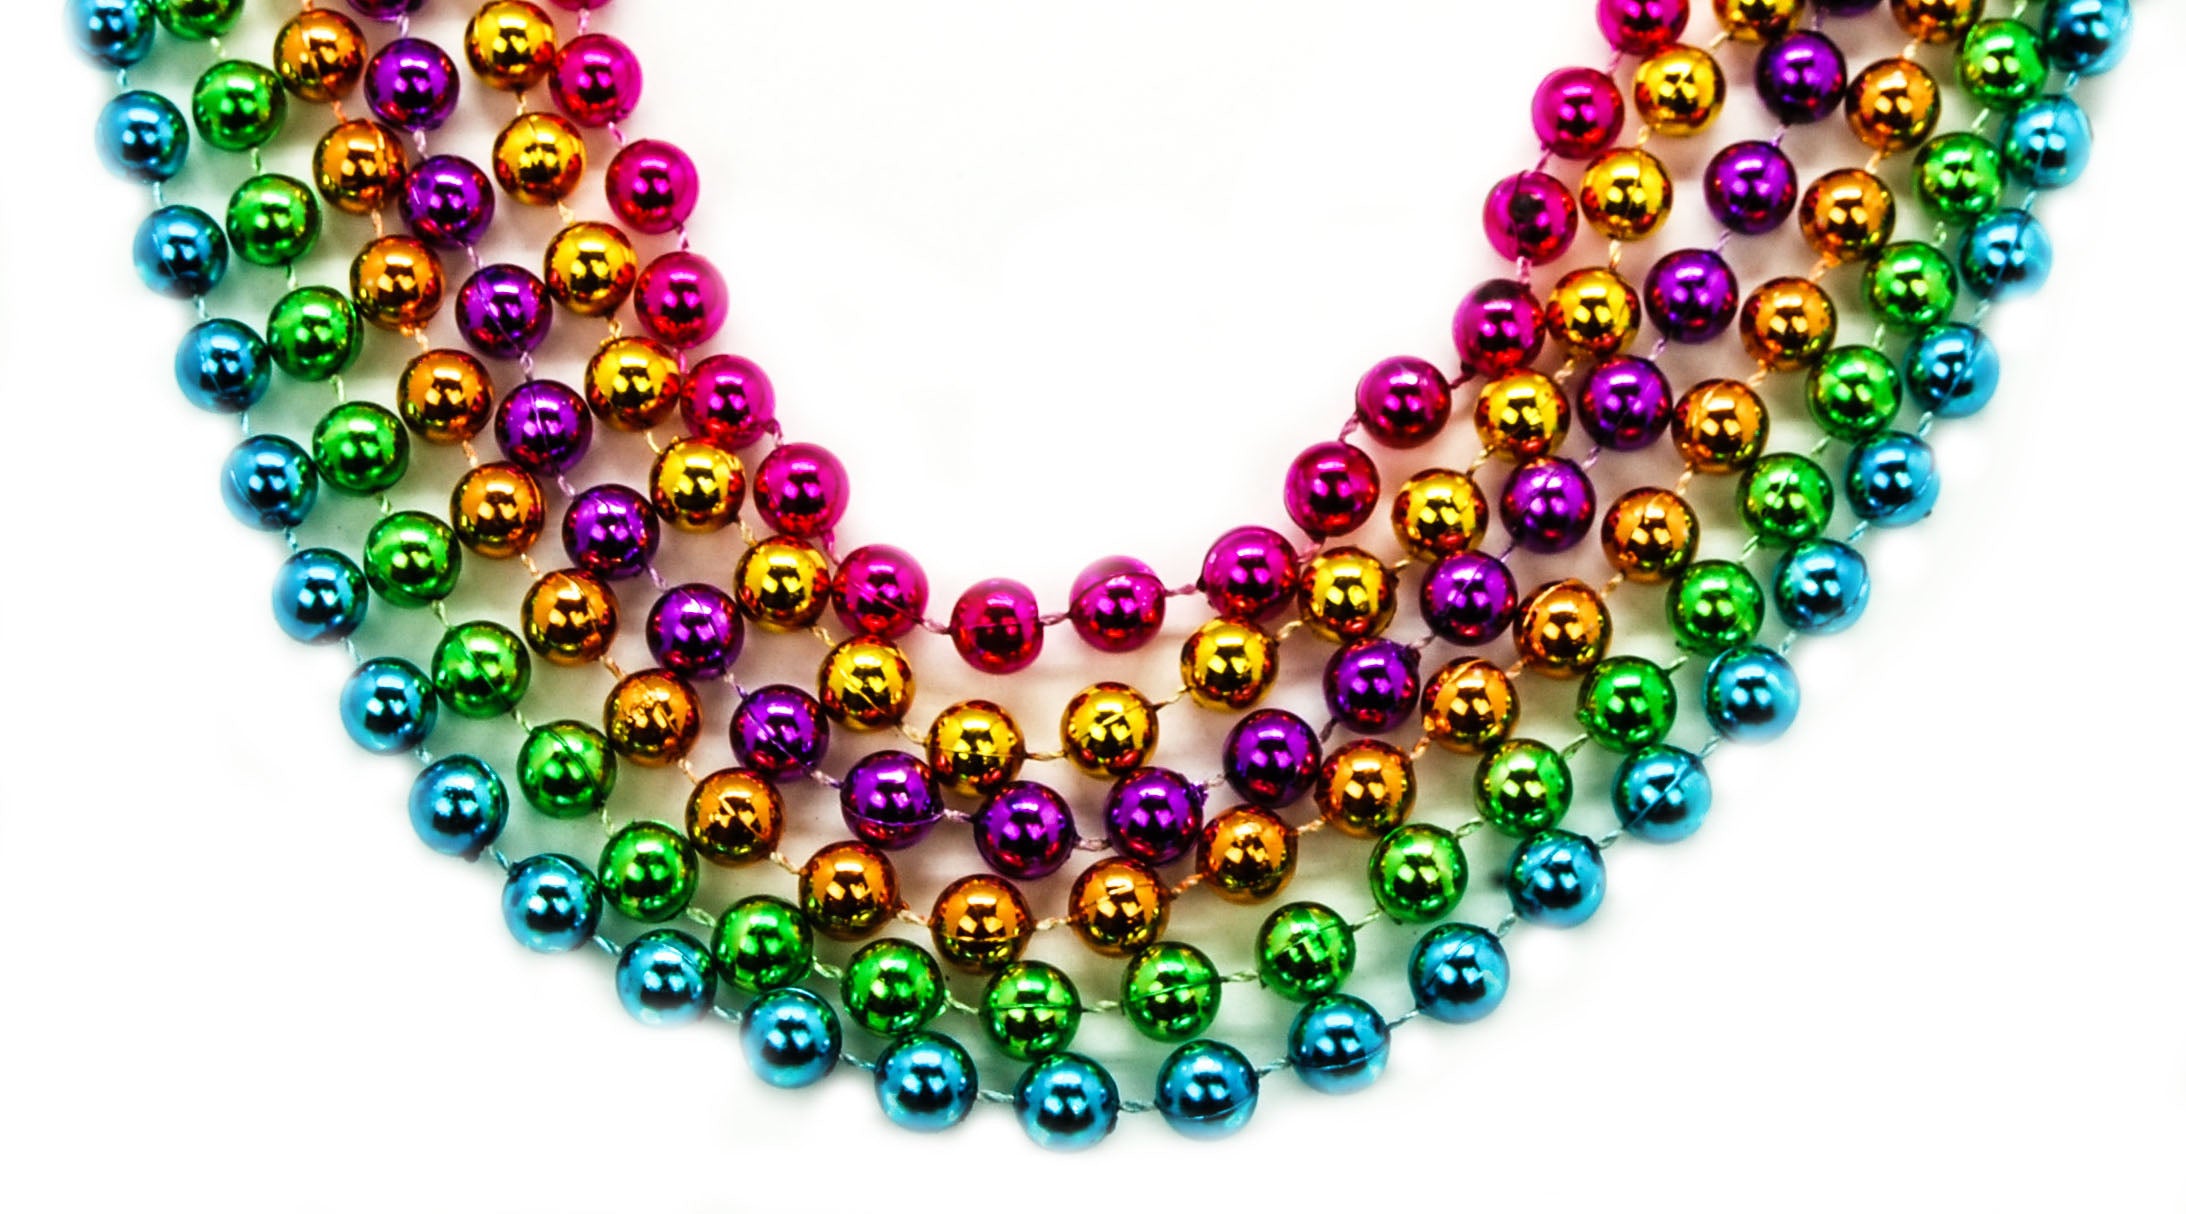 48 10mm Round Beads Assorted Neon Colors